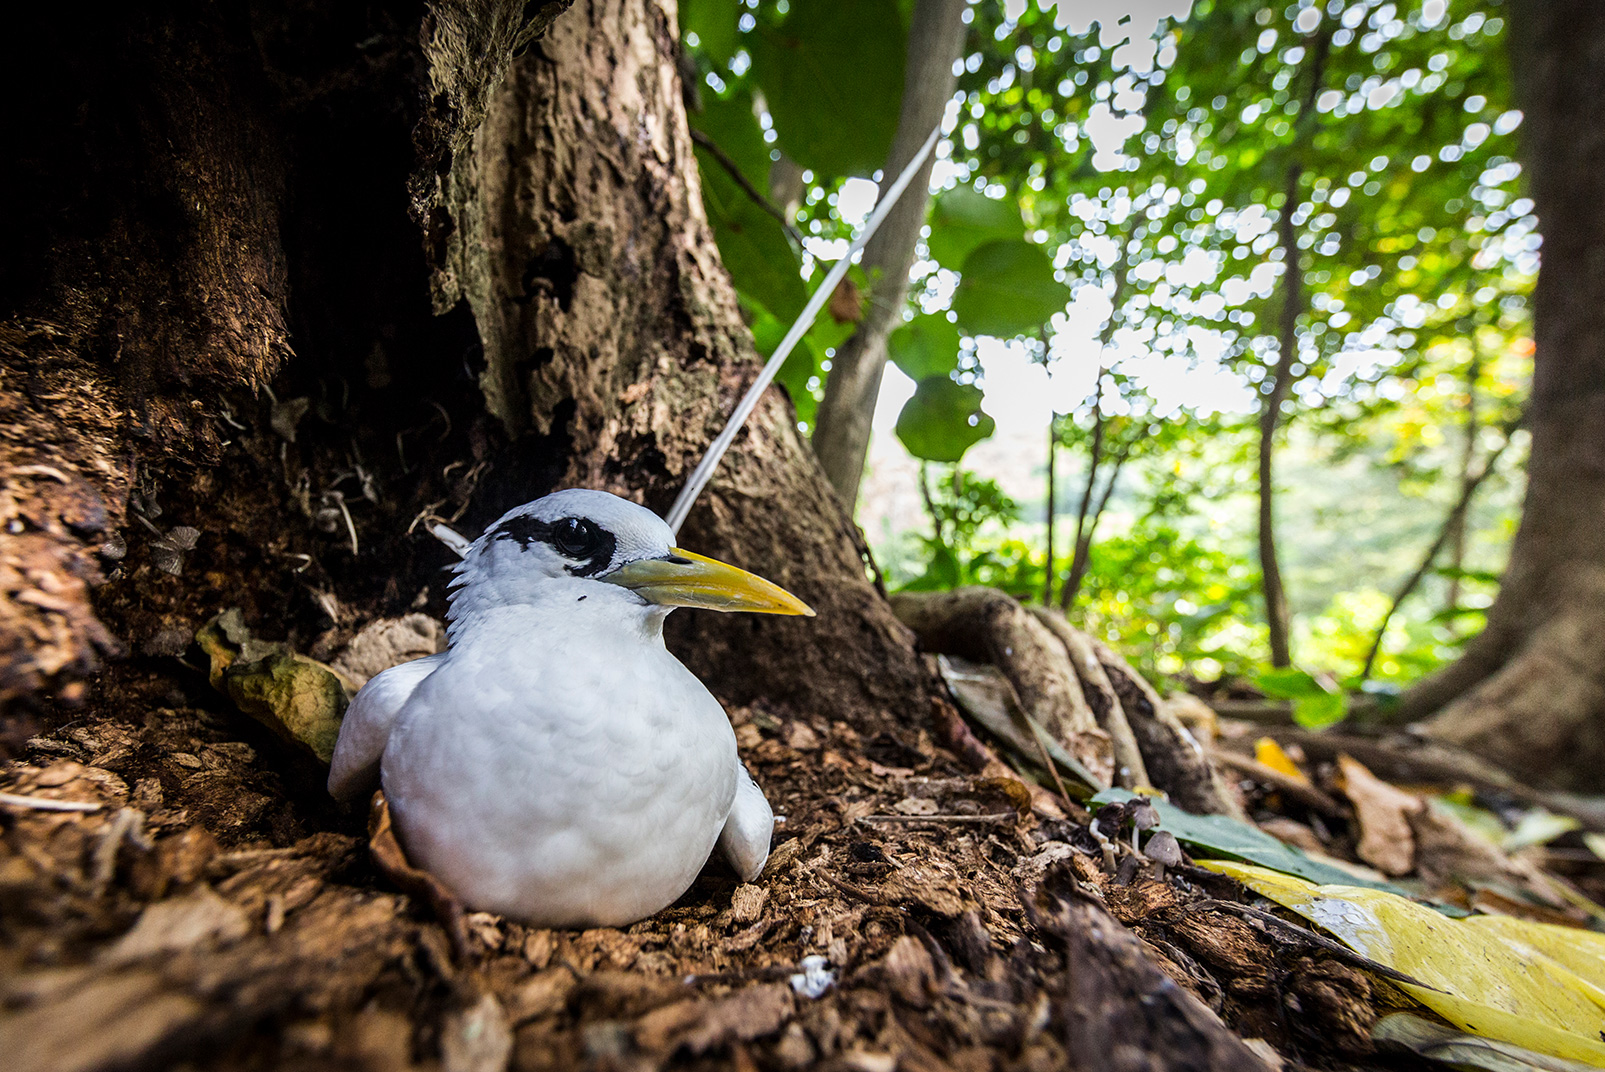 The entire island of Aride is a nature reserve in northern Seychelles where invasive animals have been removed to protect native species there. Because of that, ground-nesting birds like this white-tailed tropicbird are unafraid of visitors. There, “one of the rarest birds in the world, the Seychelles magpie-robin, literally just follows you around because it loves the disturbances in the ground,” Houston says. Photo © Jason Houston